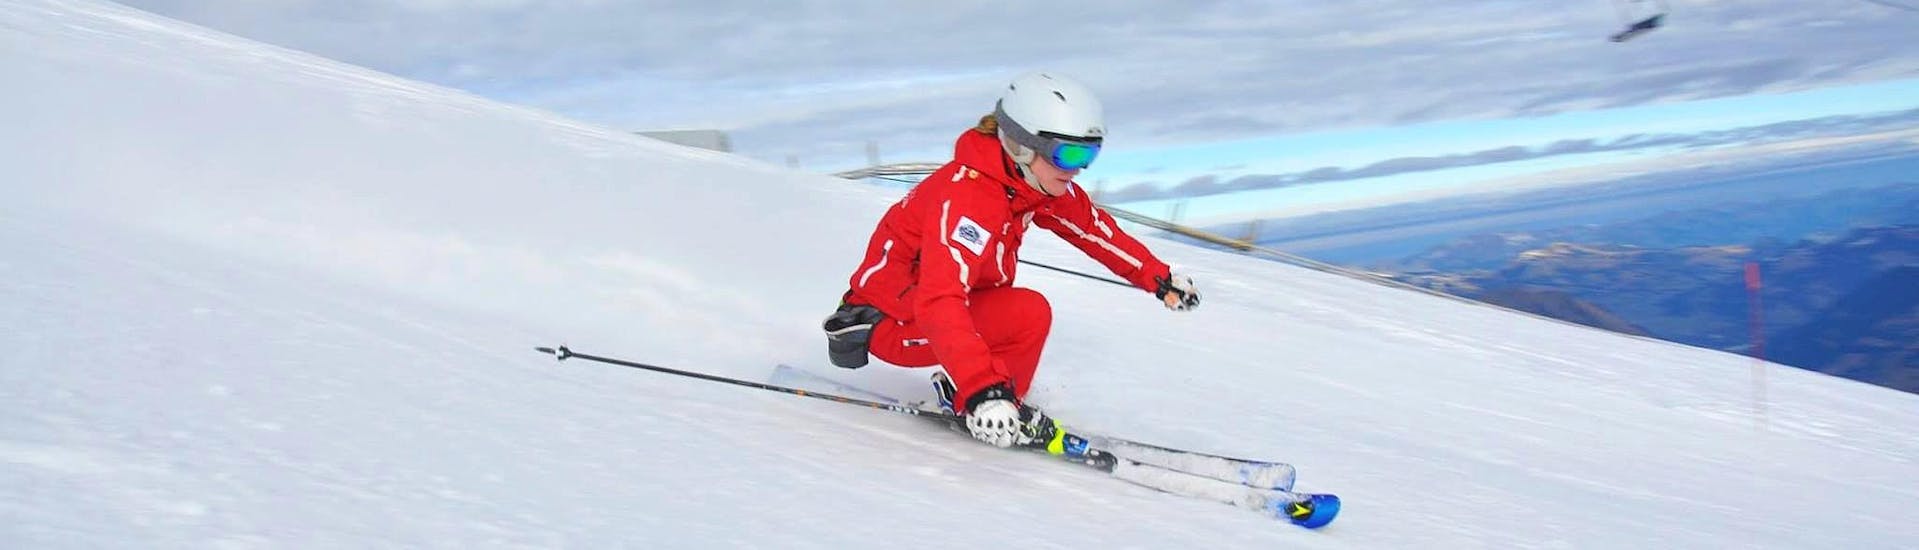 A kid is skiing with confidence thanks to their Private Ski Lessons for Kids for Experienced Skiers with the ski school ESS Château d'Oex.